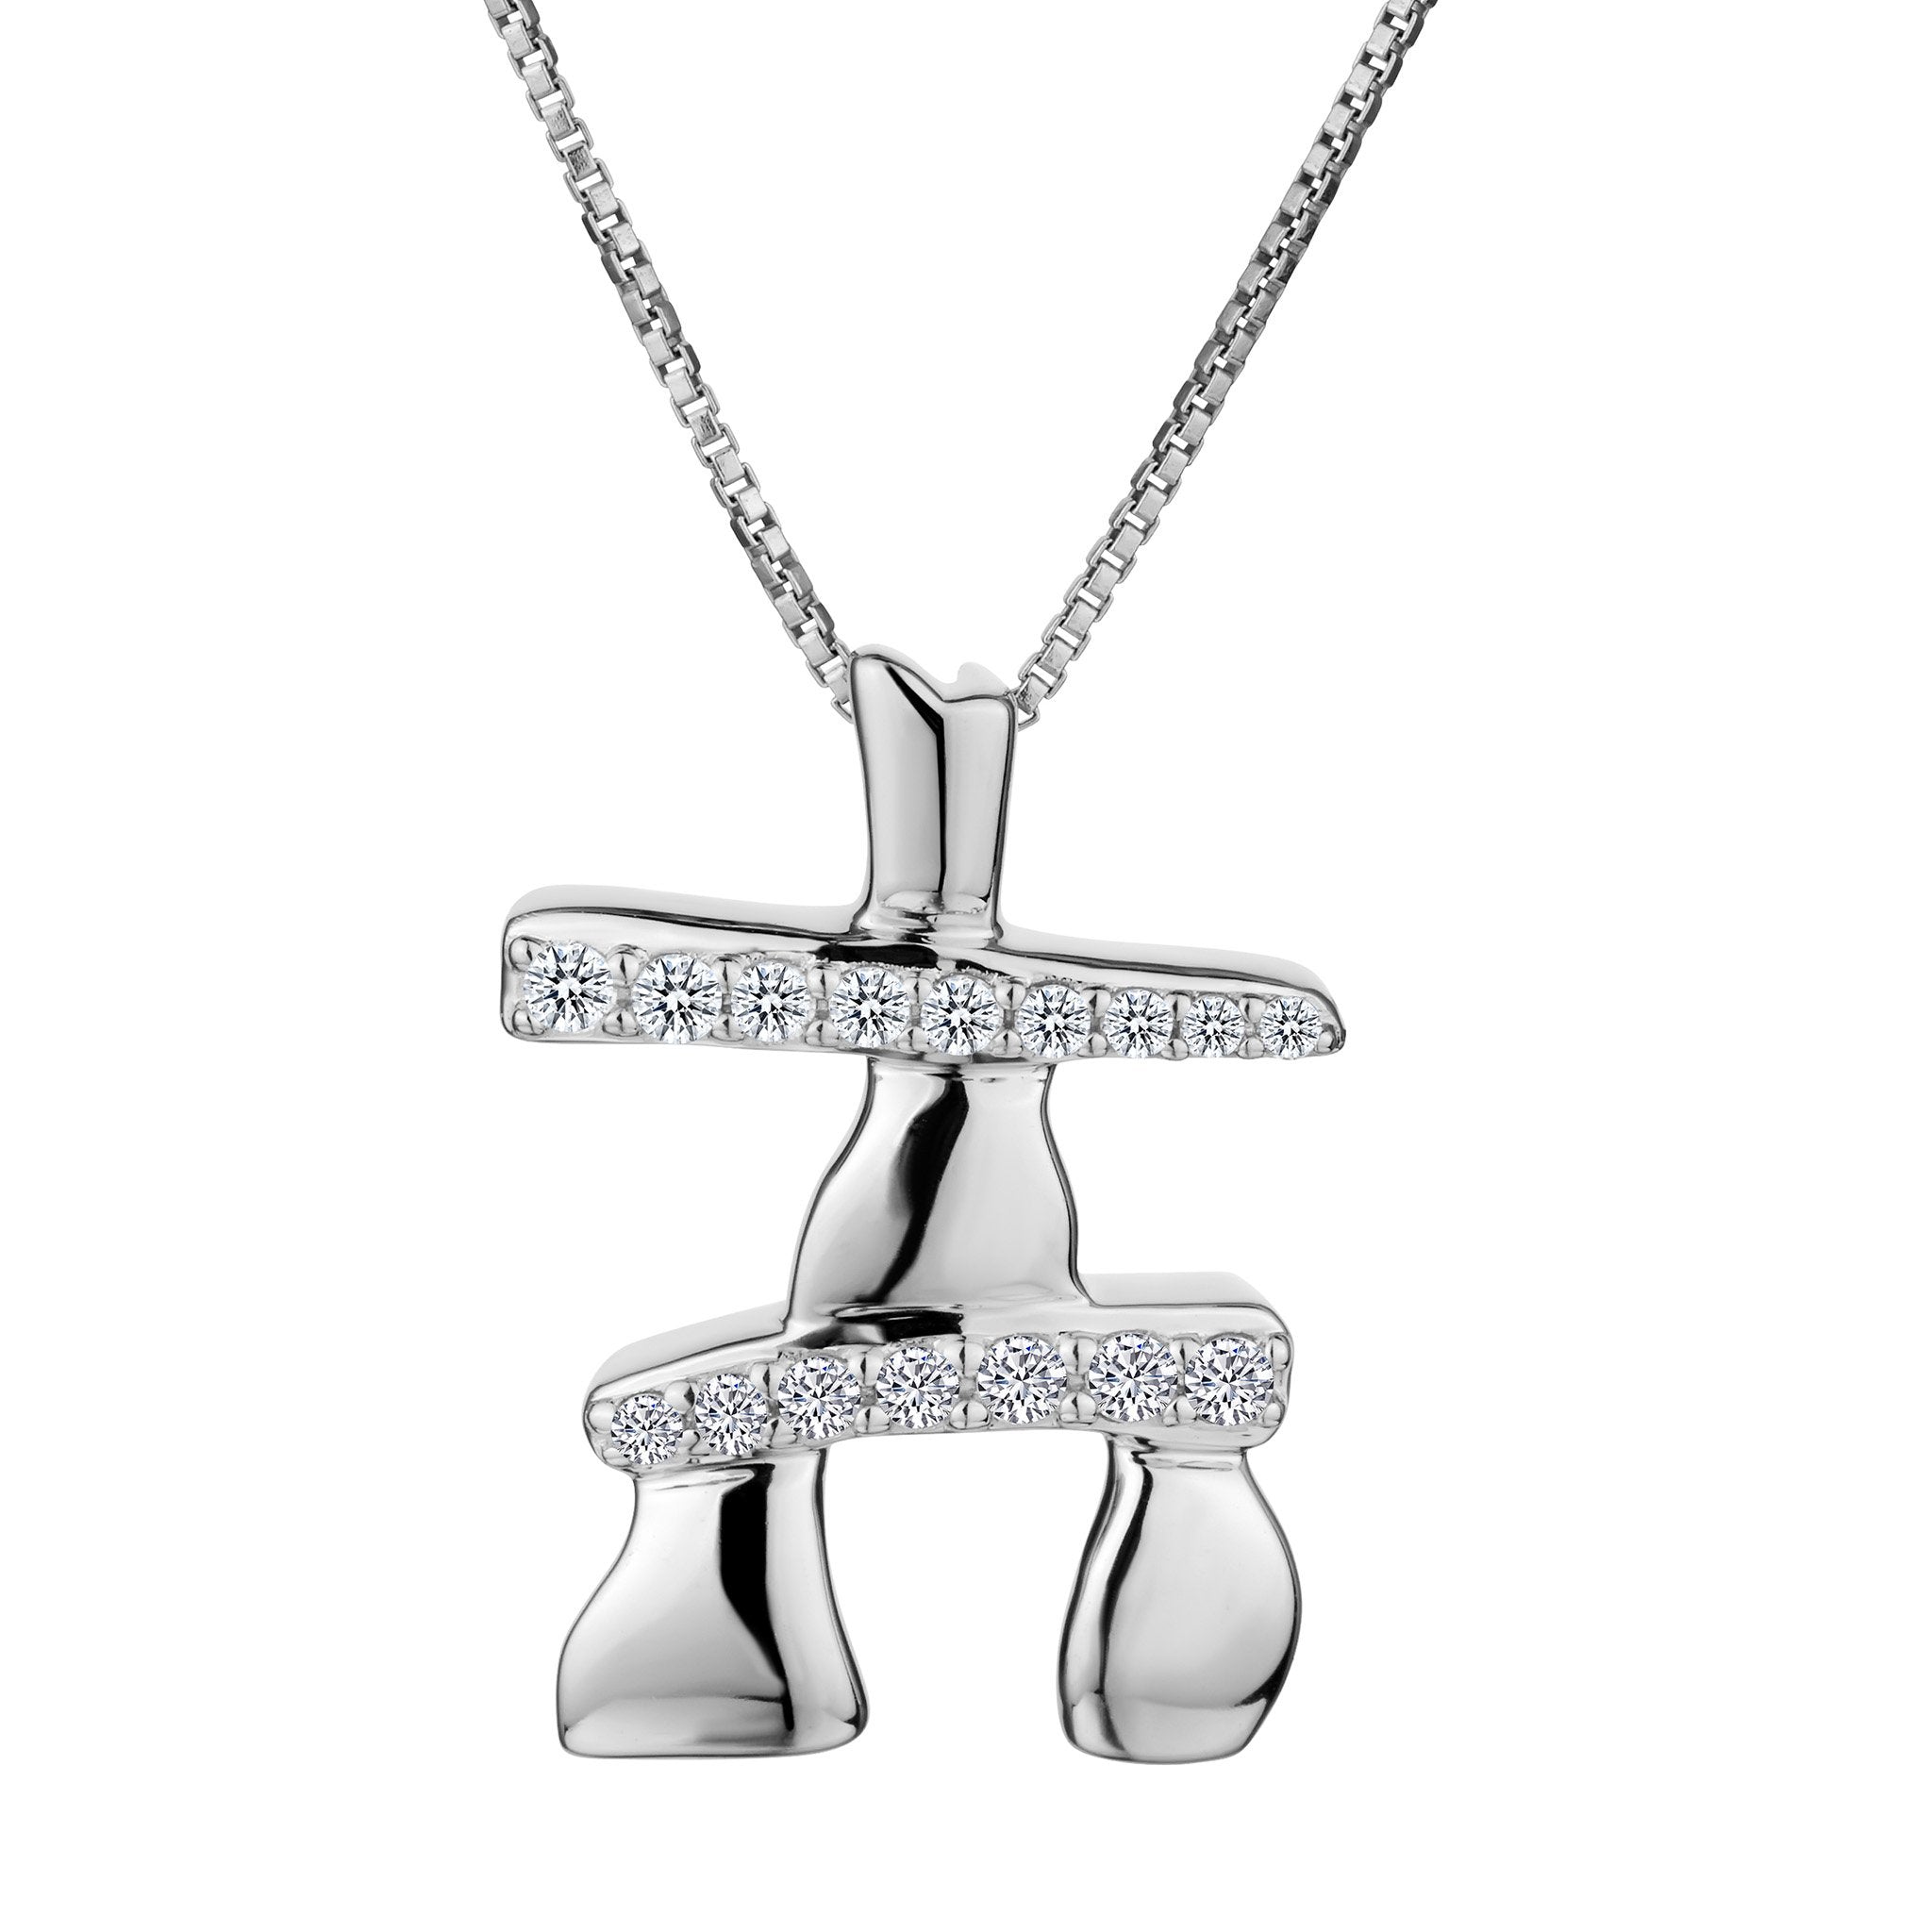 .16 Carat Diamond  "Inukshuk" Pendant,  Sterling Silver. Necklaces and Pendants. Griffin Jewellery Designs.